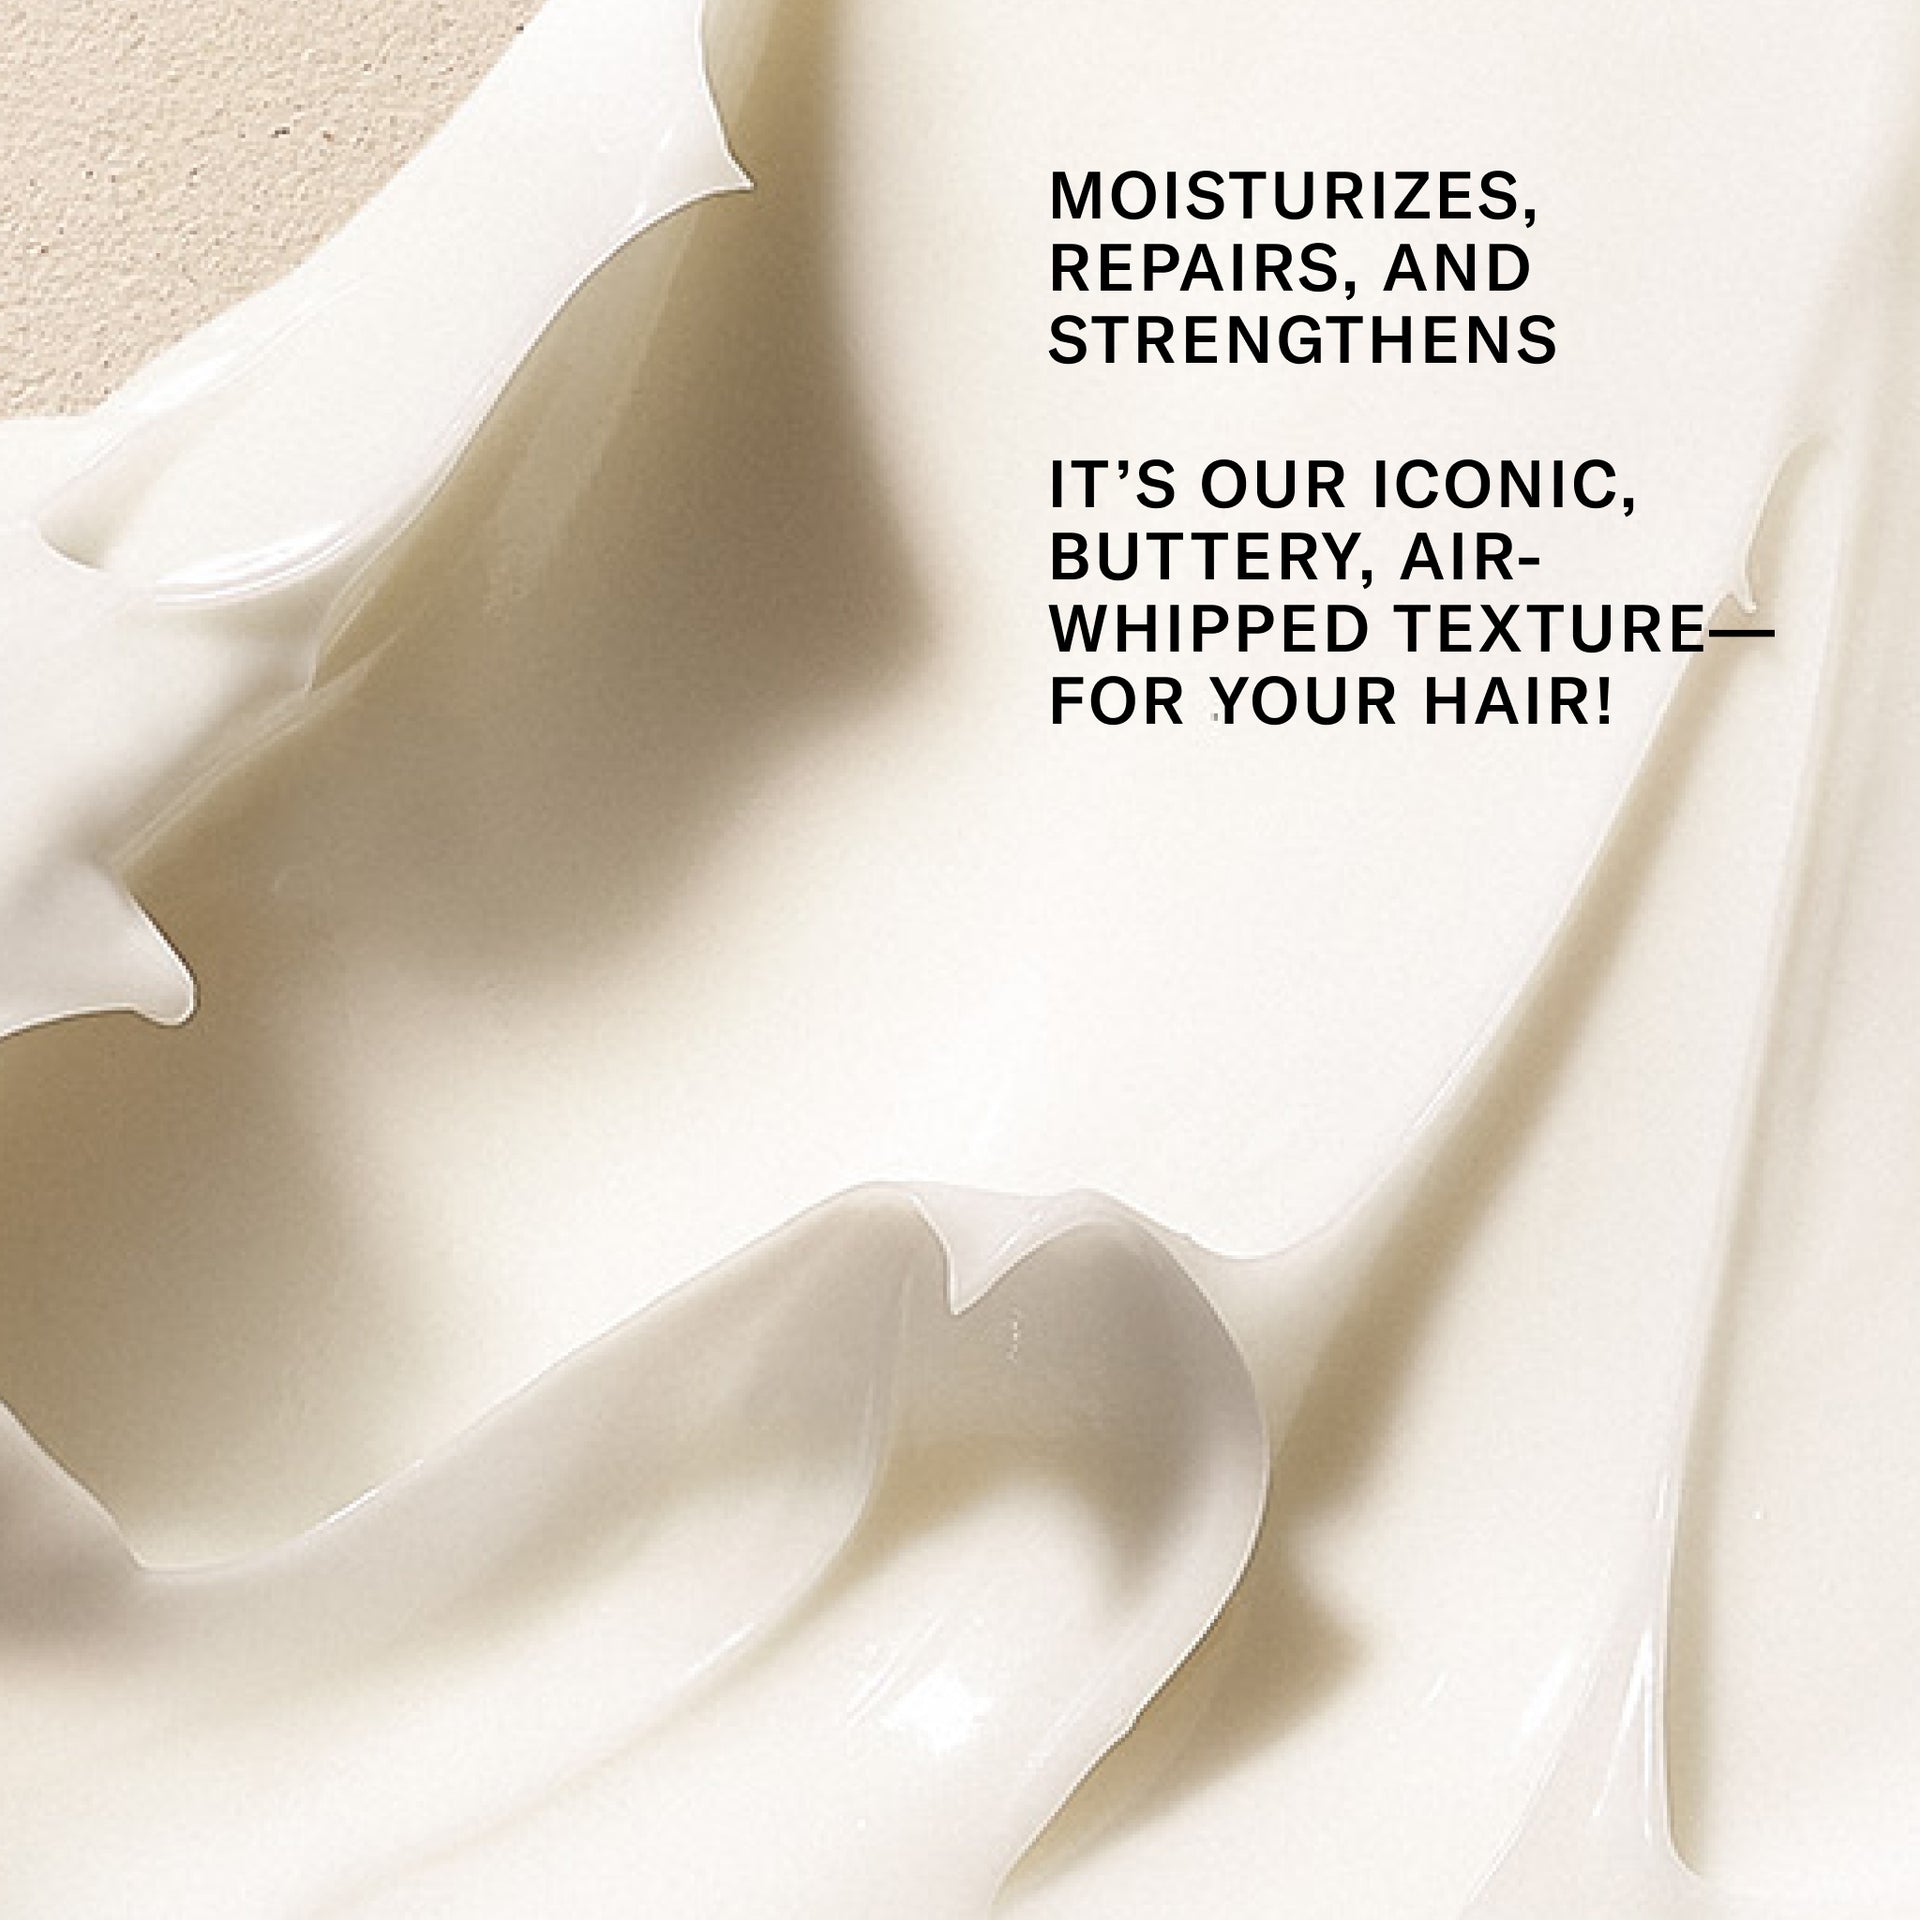 Moisturizes, repairs, and strengthens. It's our iconic buttery air whipped texture for your hair.  